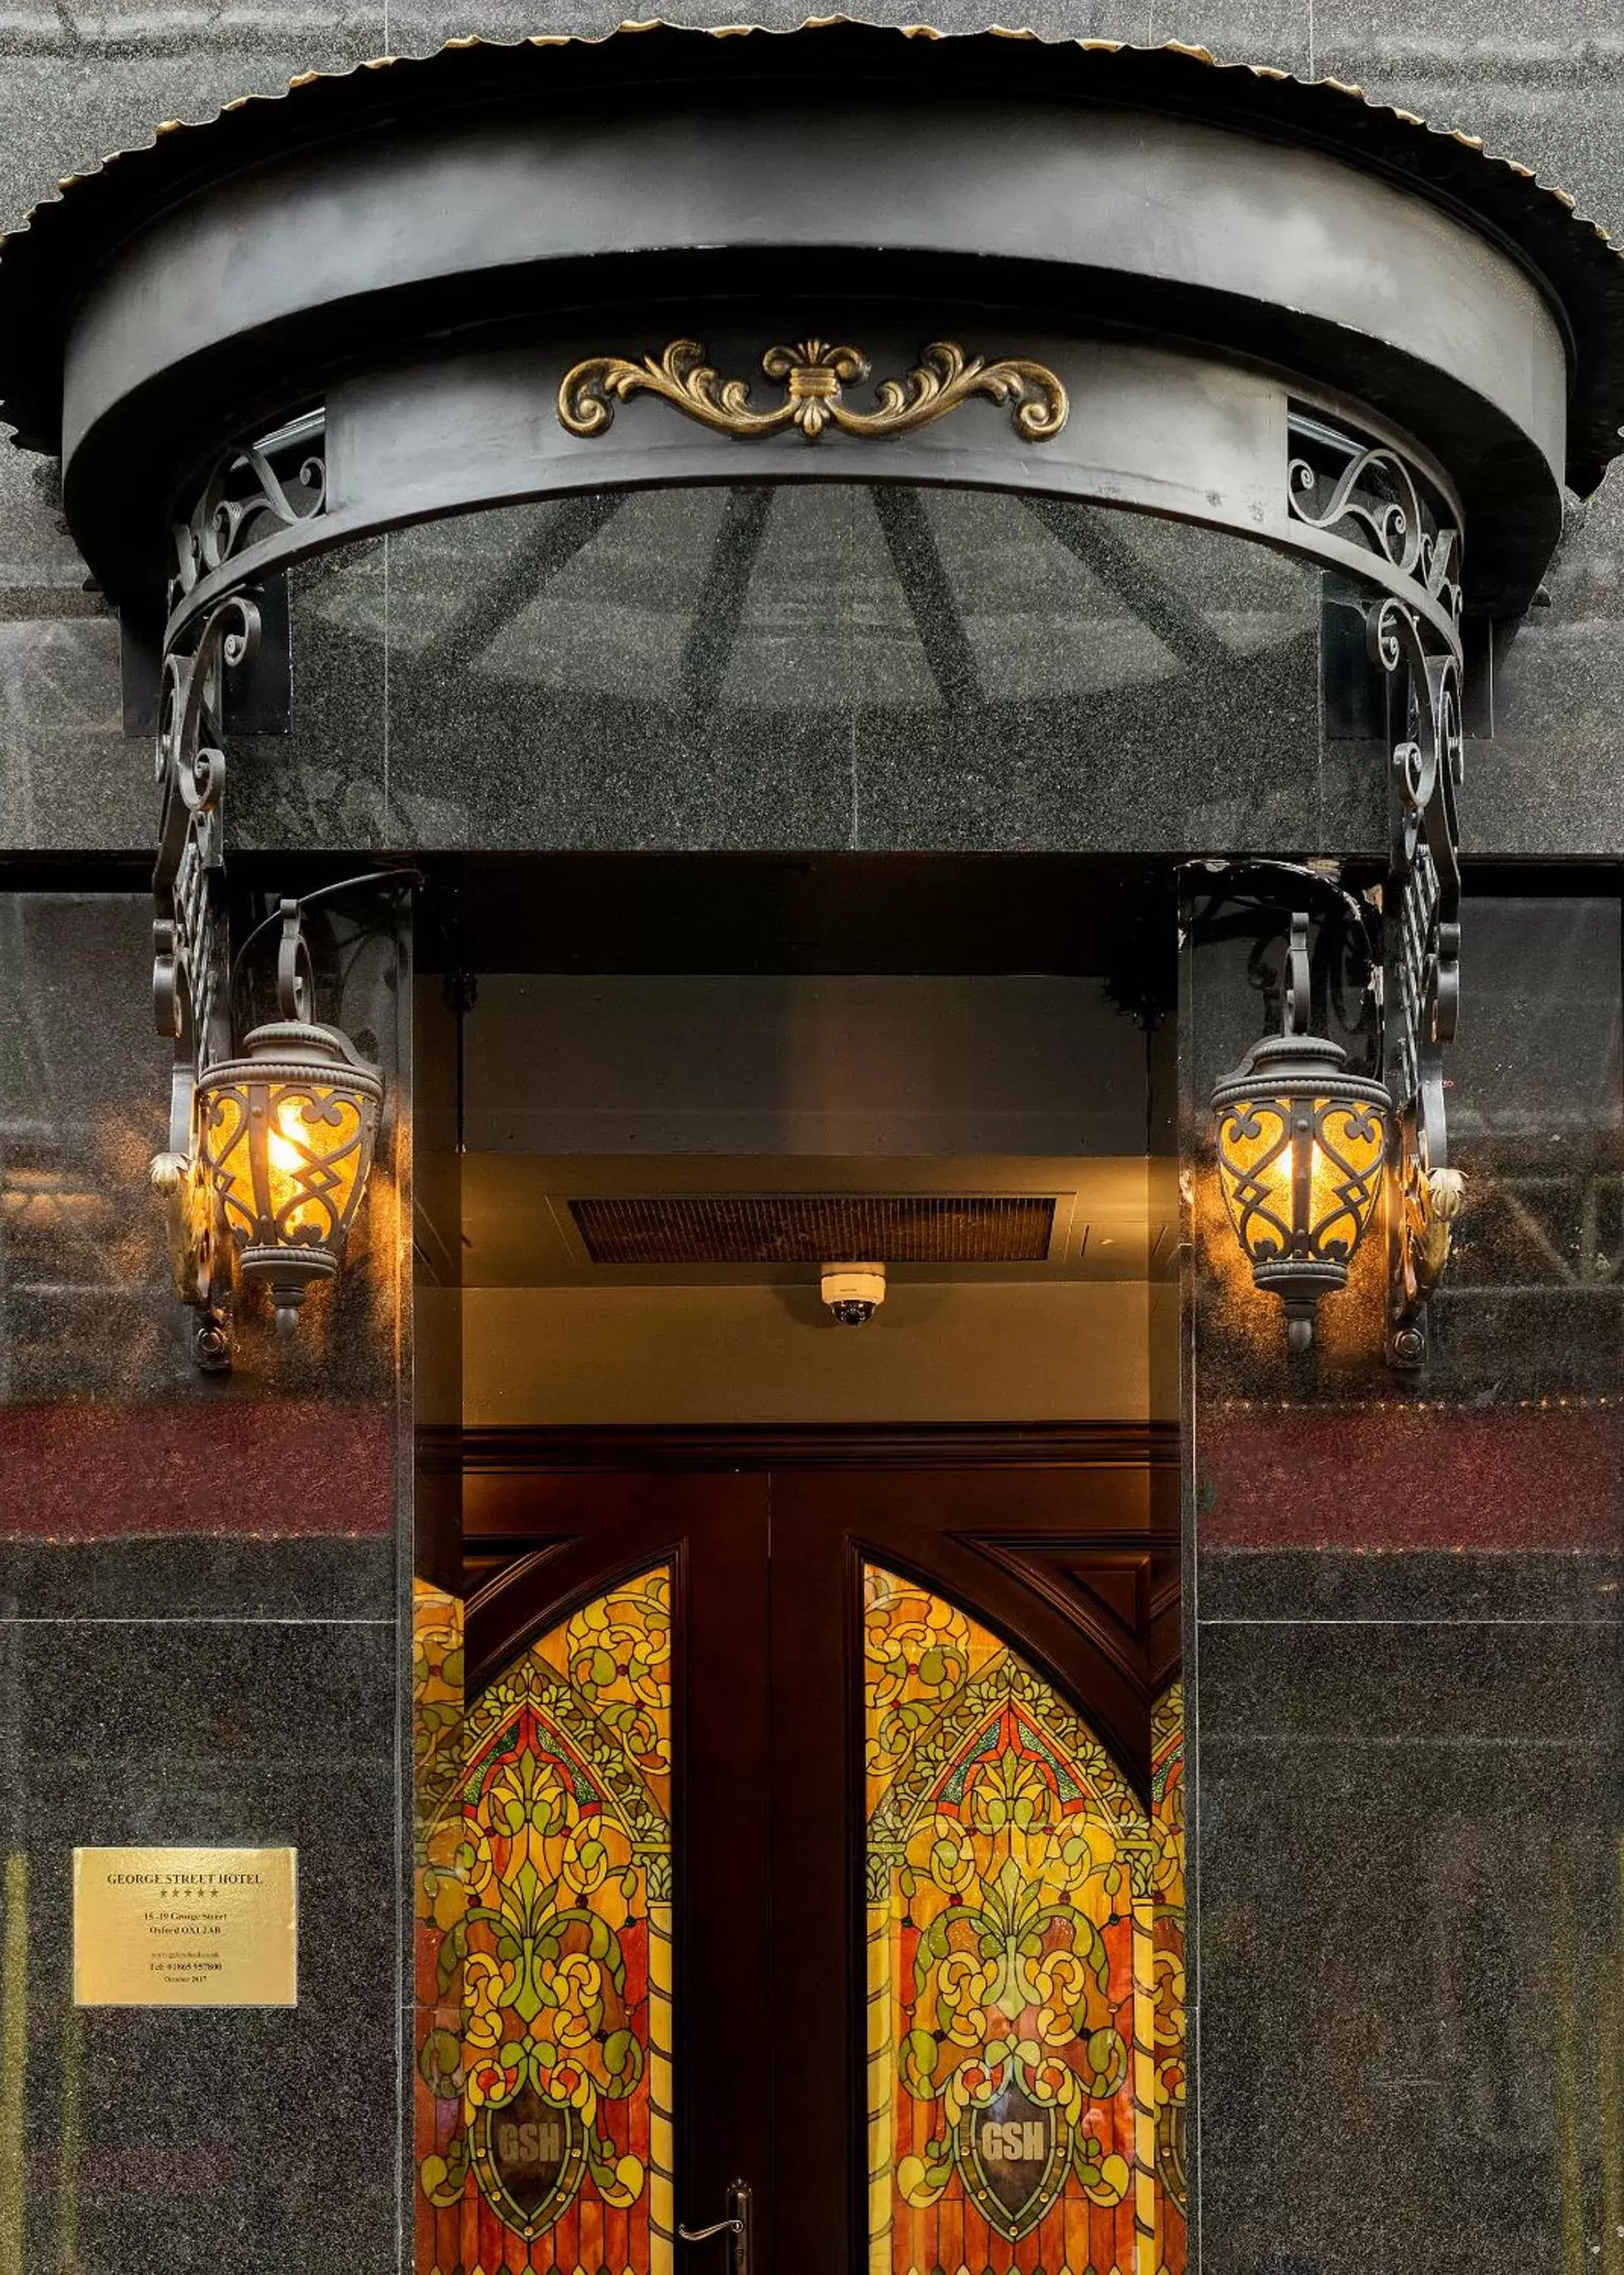 Facade/entrance in The George Street Hotel